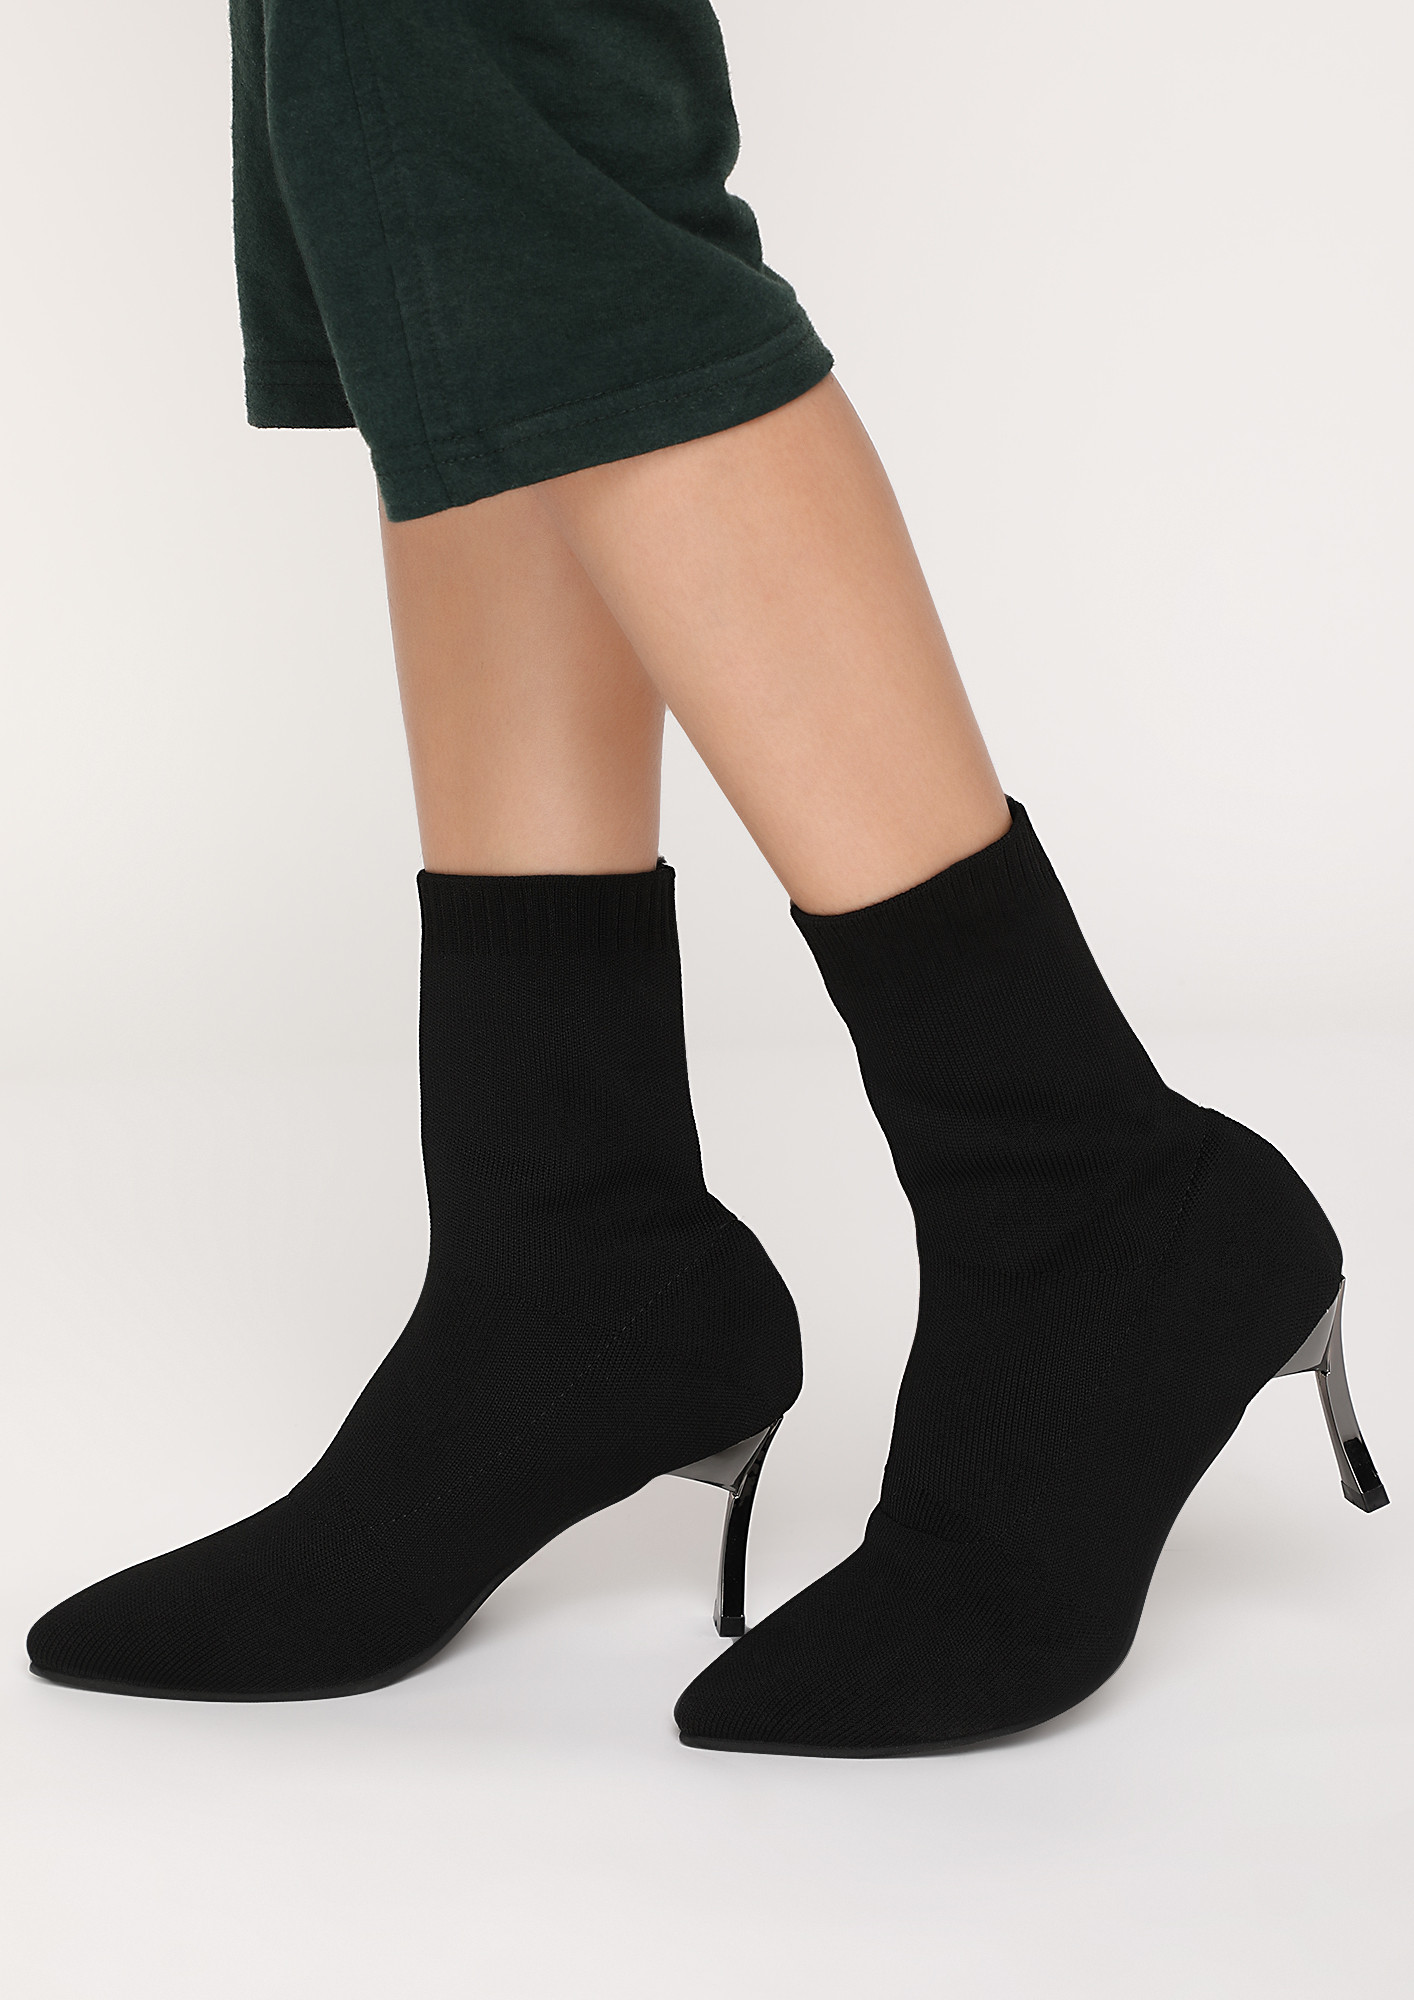 Every Day Ease Black Boots